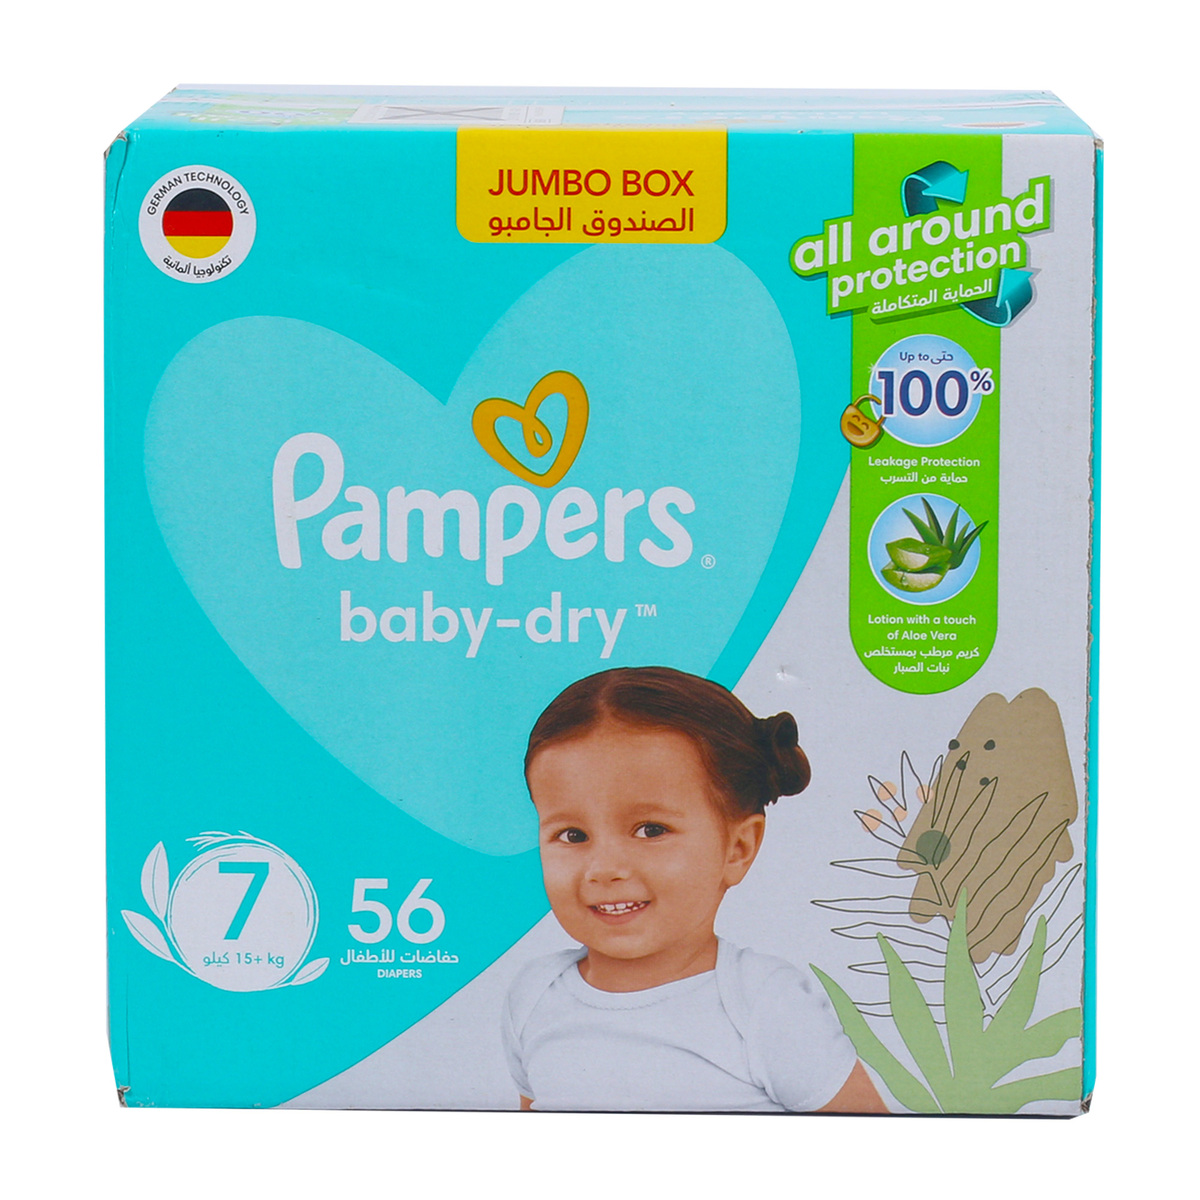 Pampers Diaper Baby Dry Size 7 15+ kg Value Pack 56 pcs